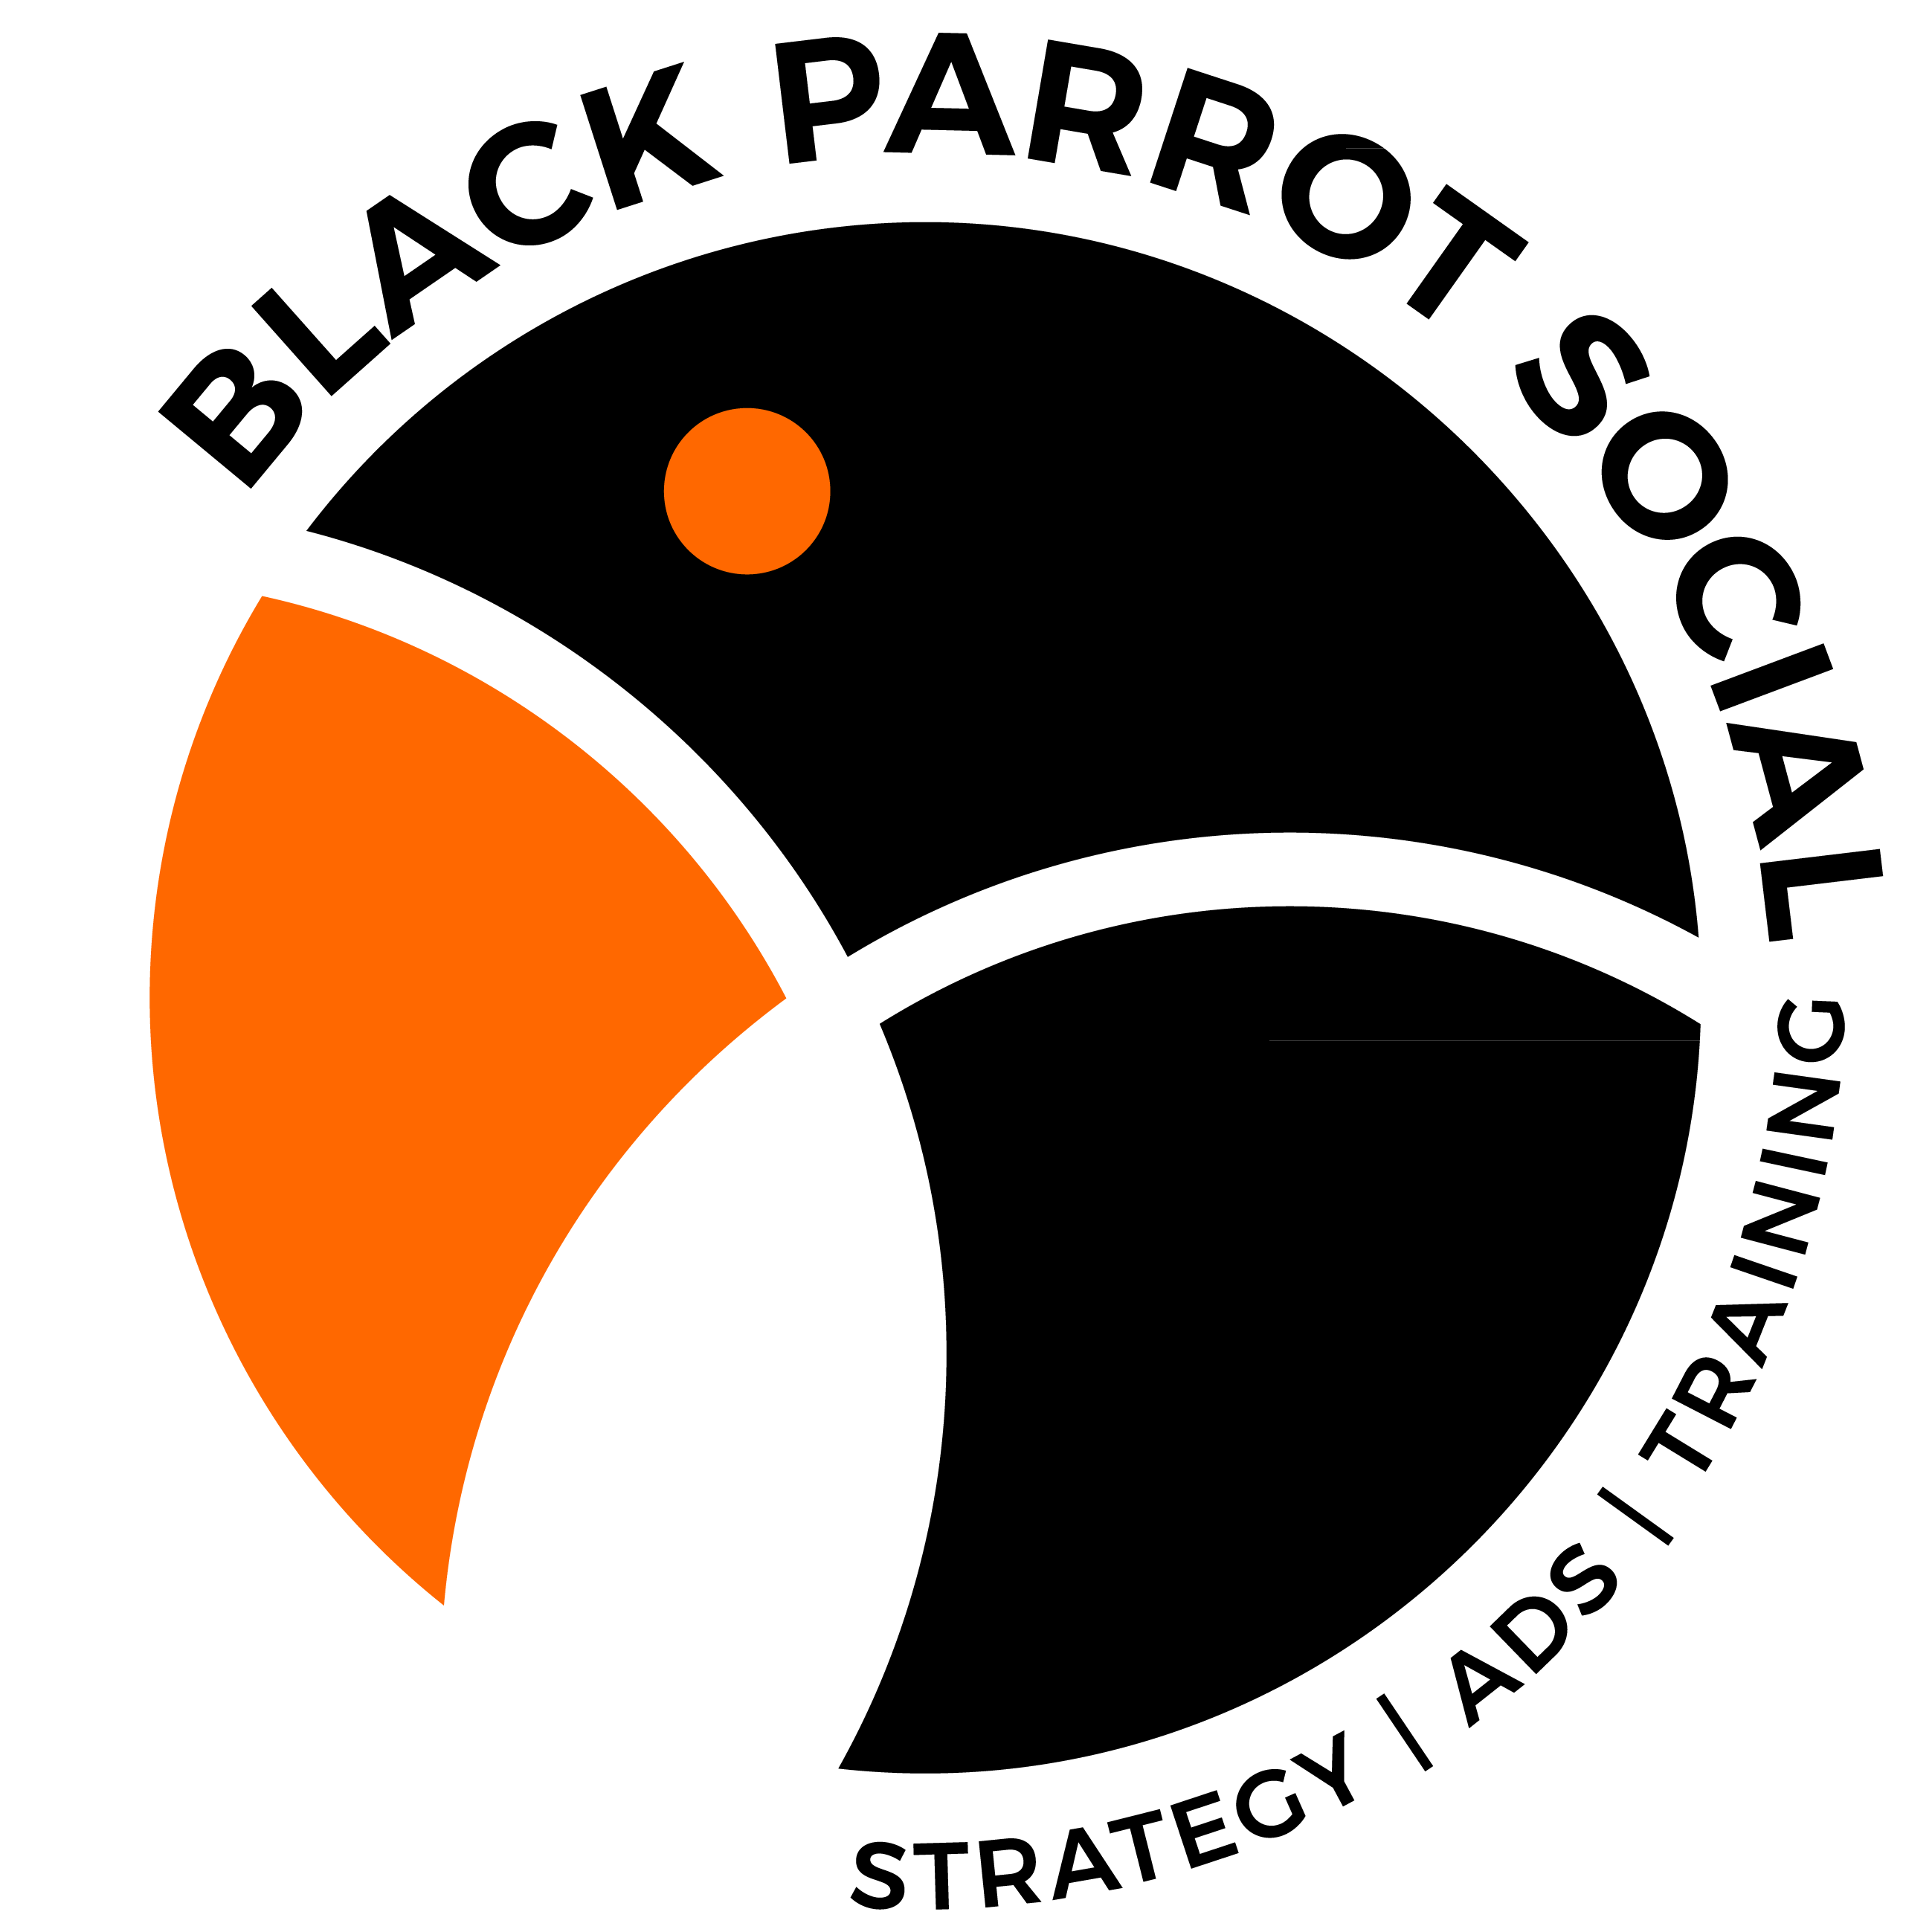 Black Parrot logo with wording